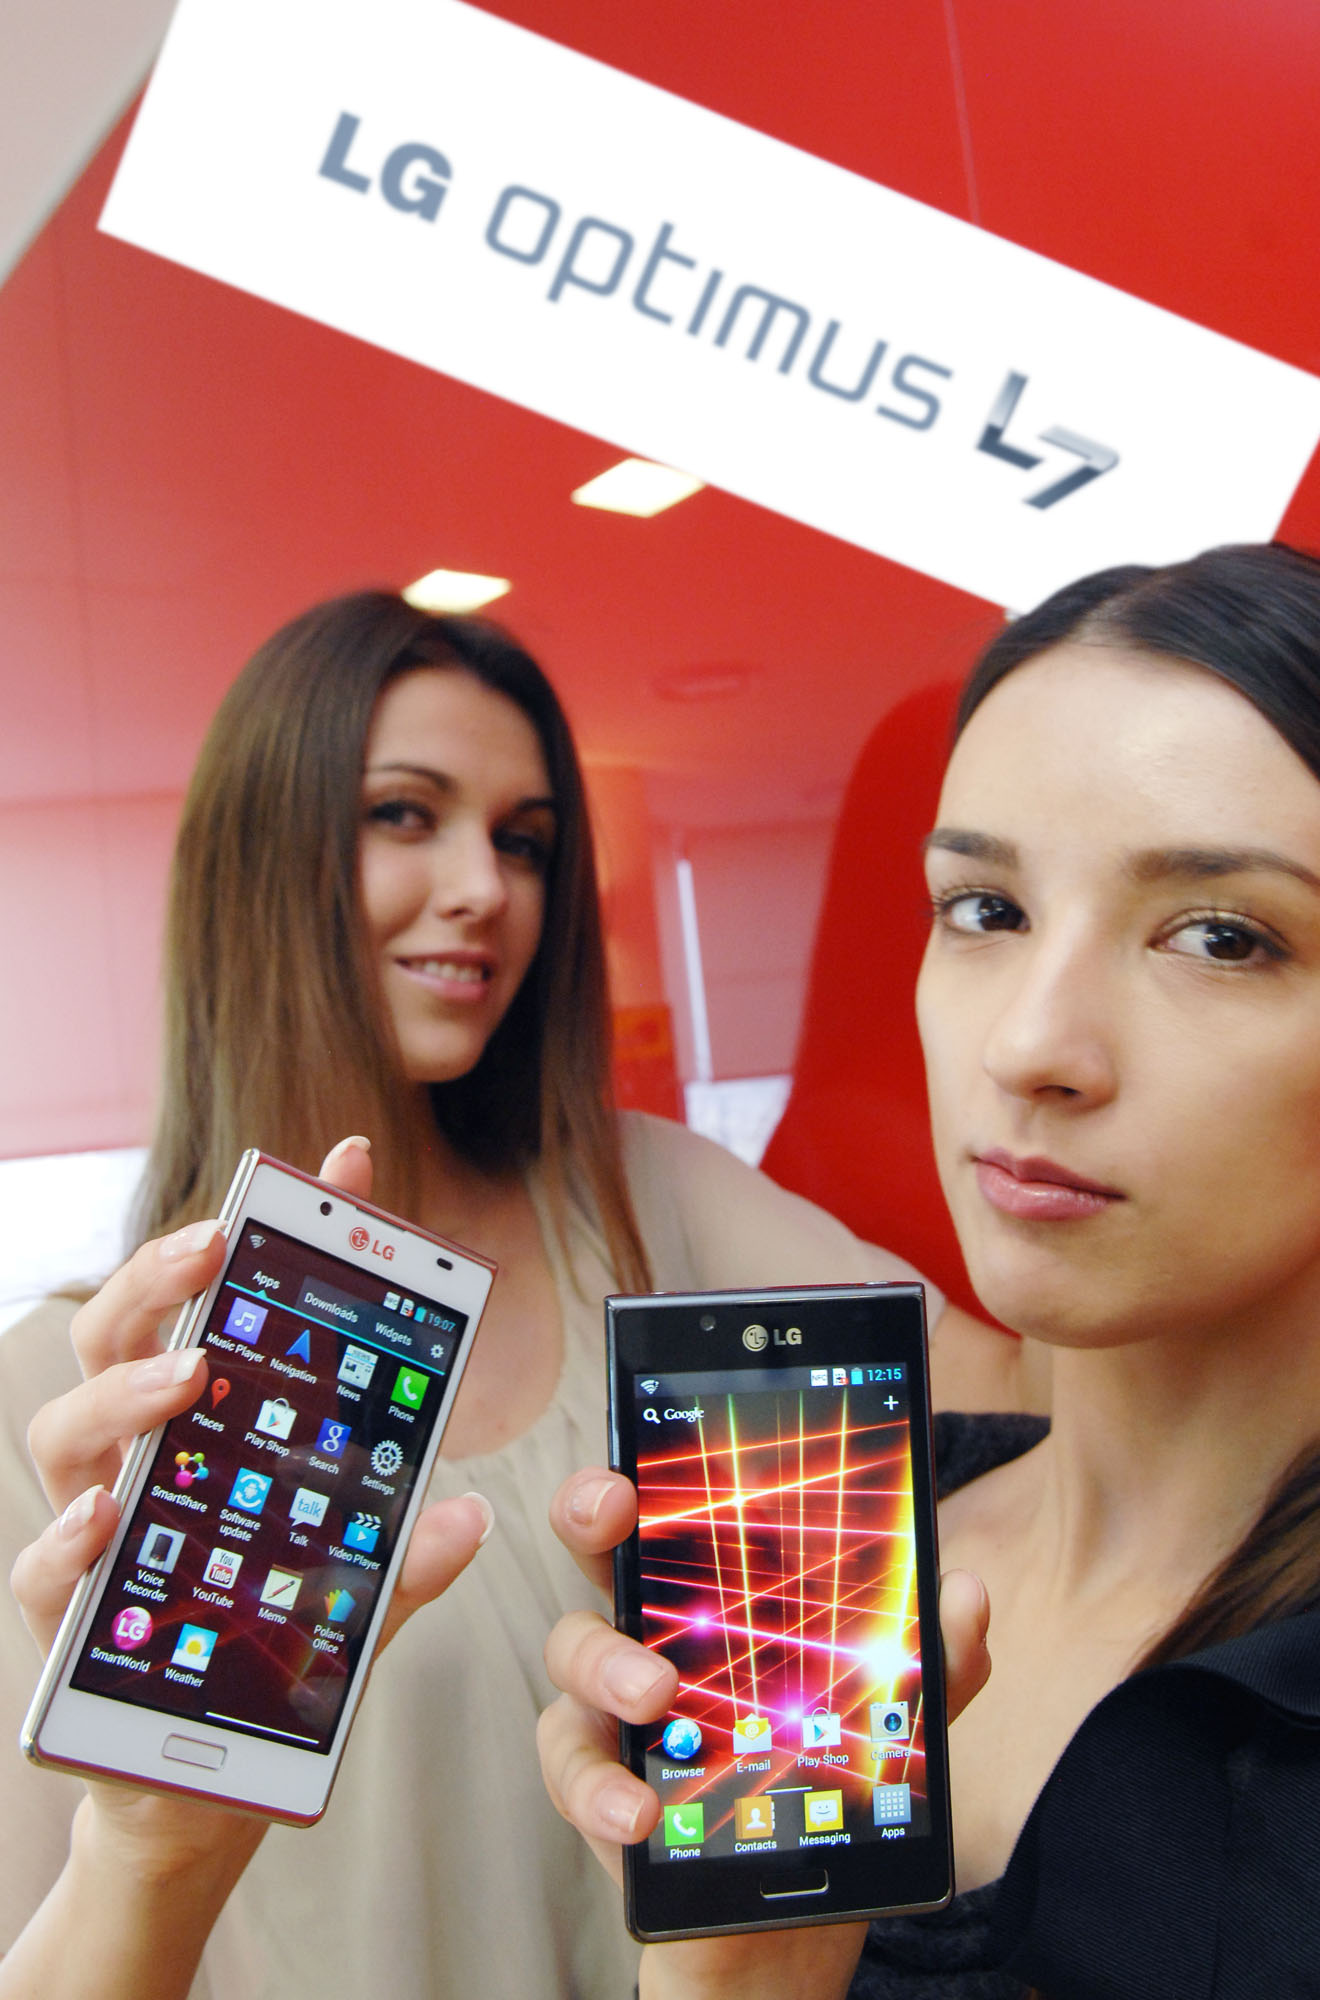 A third view of a model holding the white LG Optimus L7 while another holds the LG Optimus L7 and the LG Optimus L7 logo